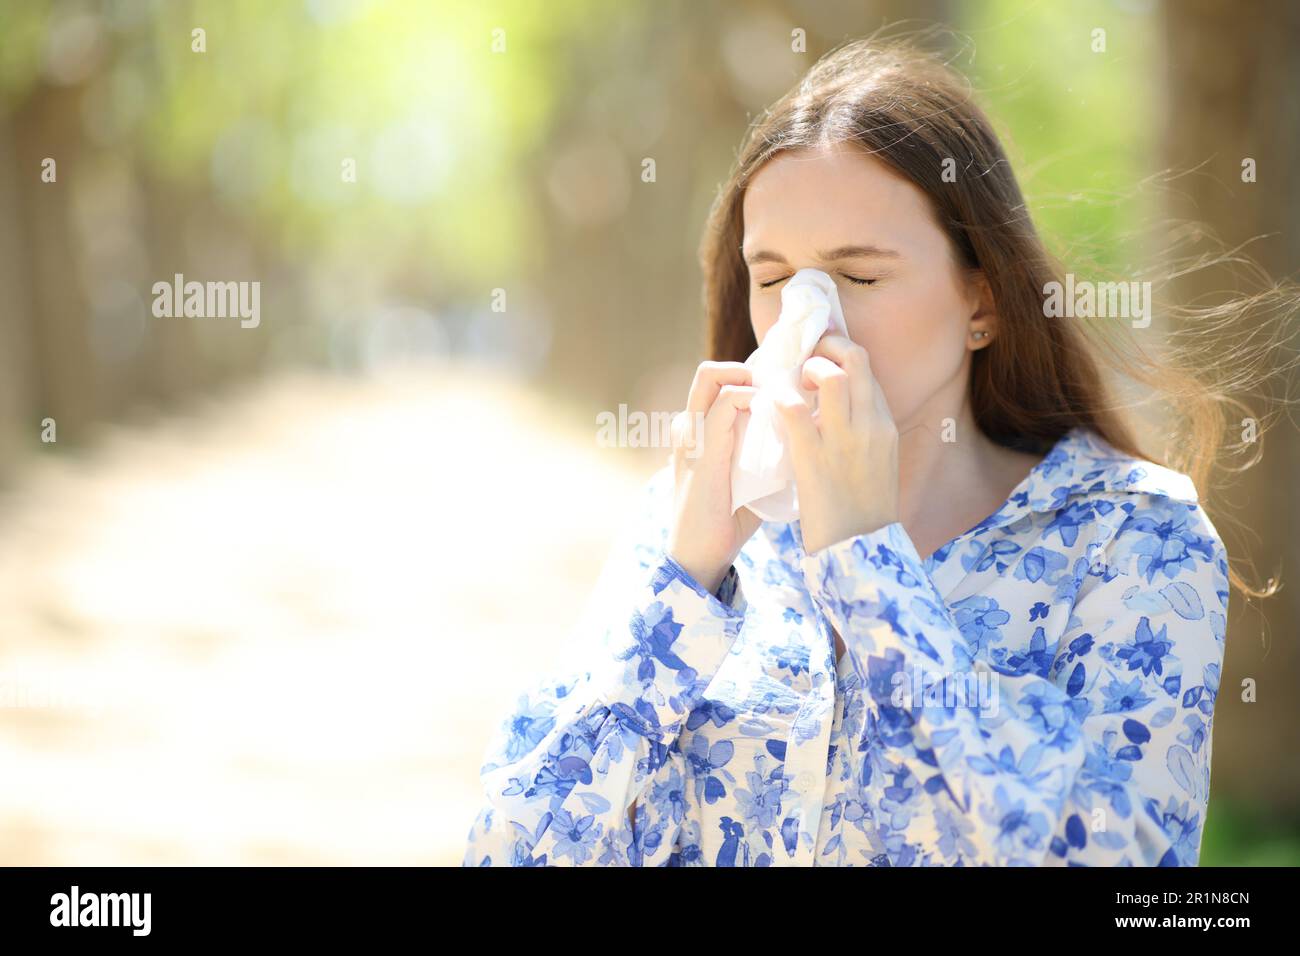 Allergic woman blowing on tissue walking in summer in a park Stock Photo